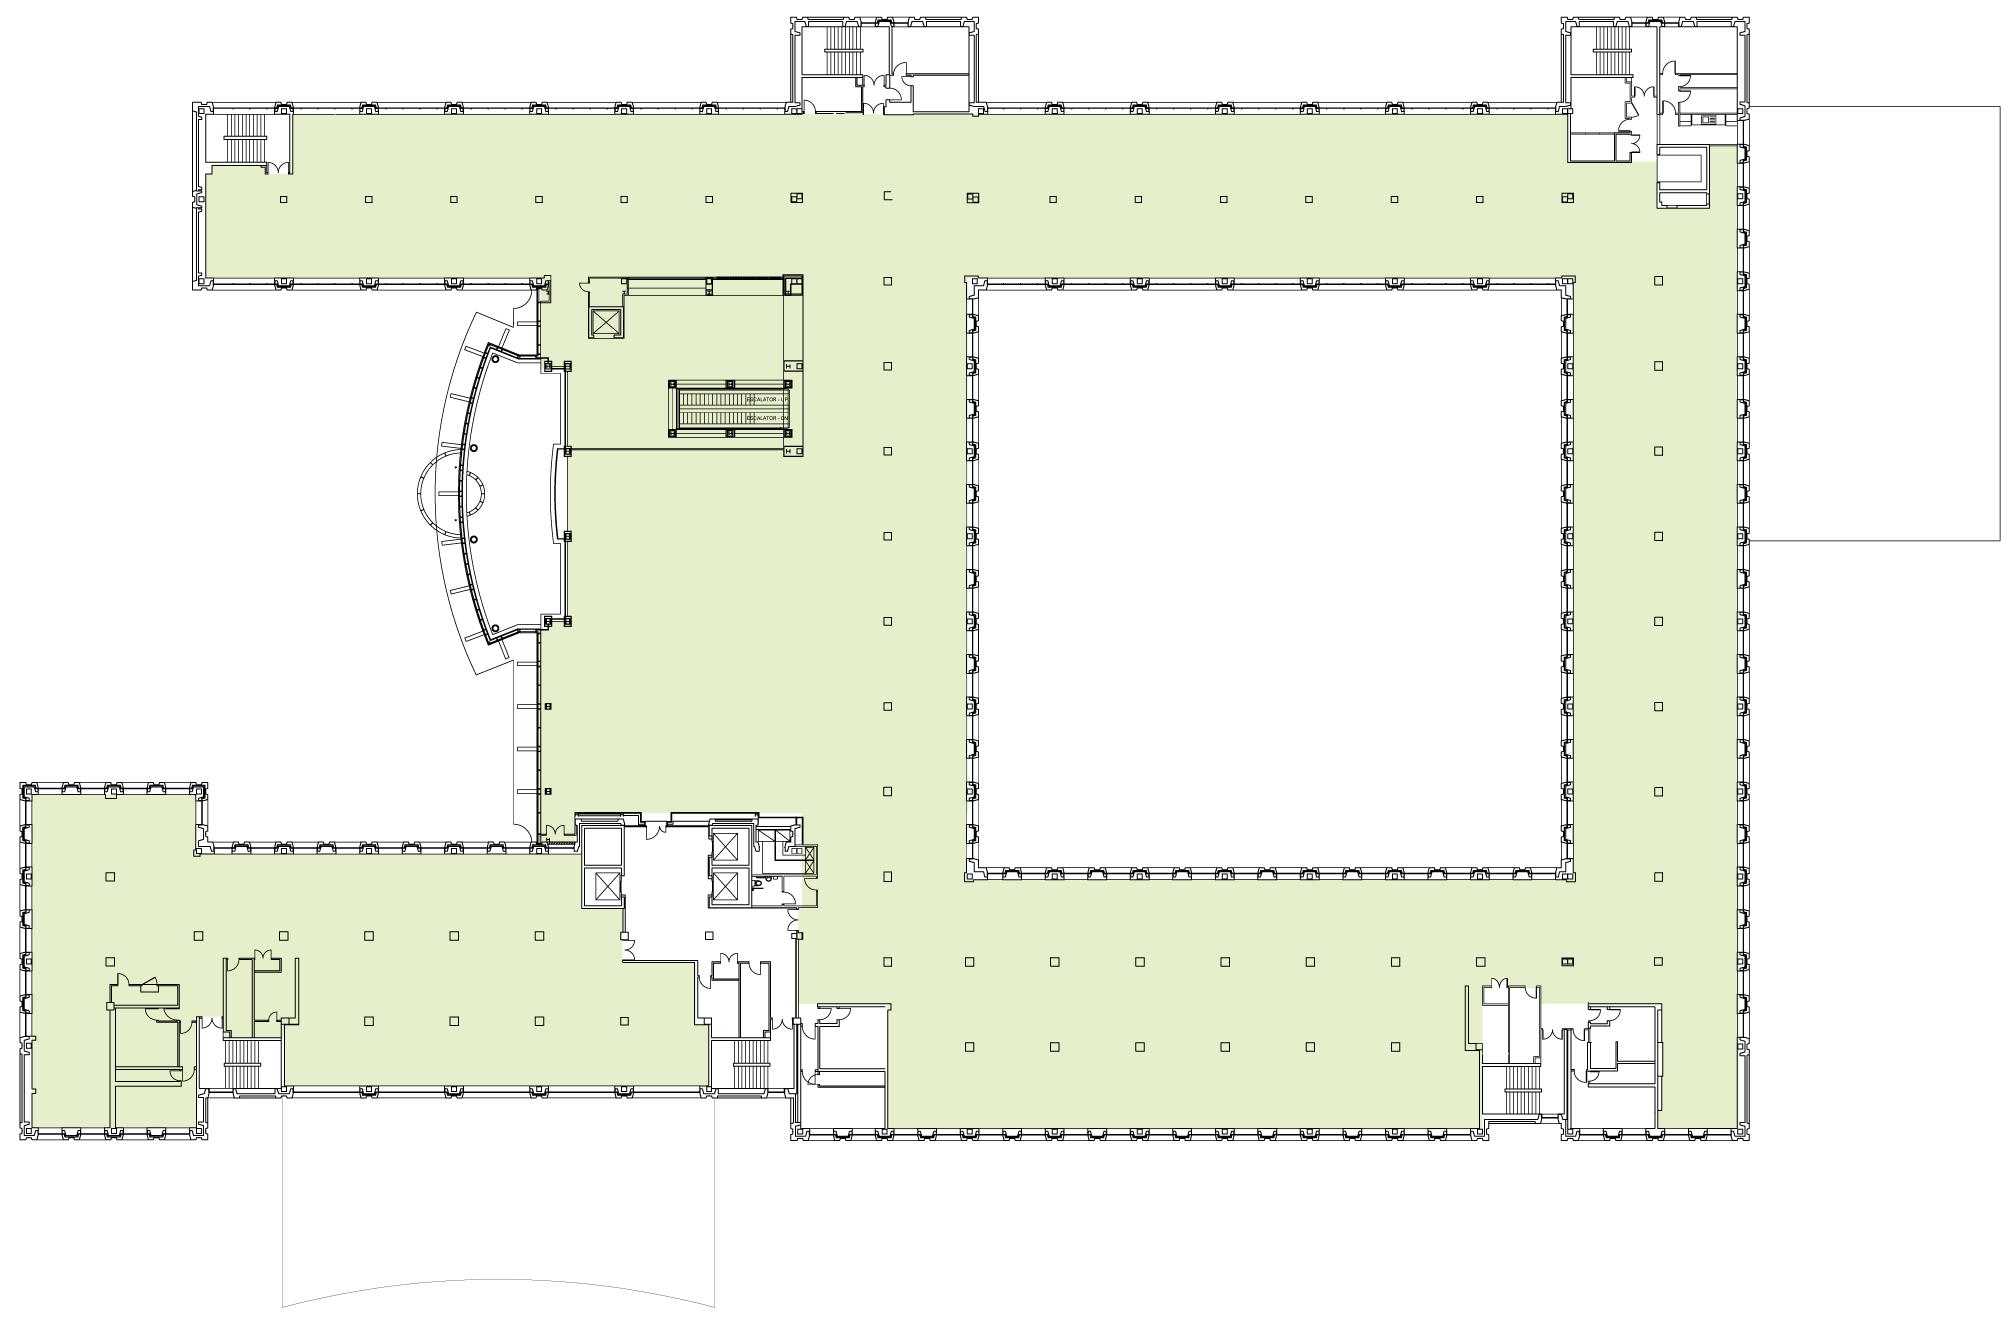 First Floor - 46,590 sq ft (432 people)